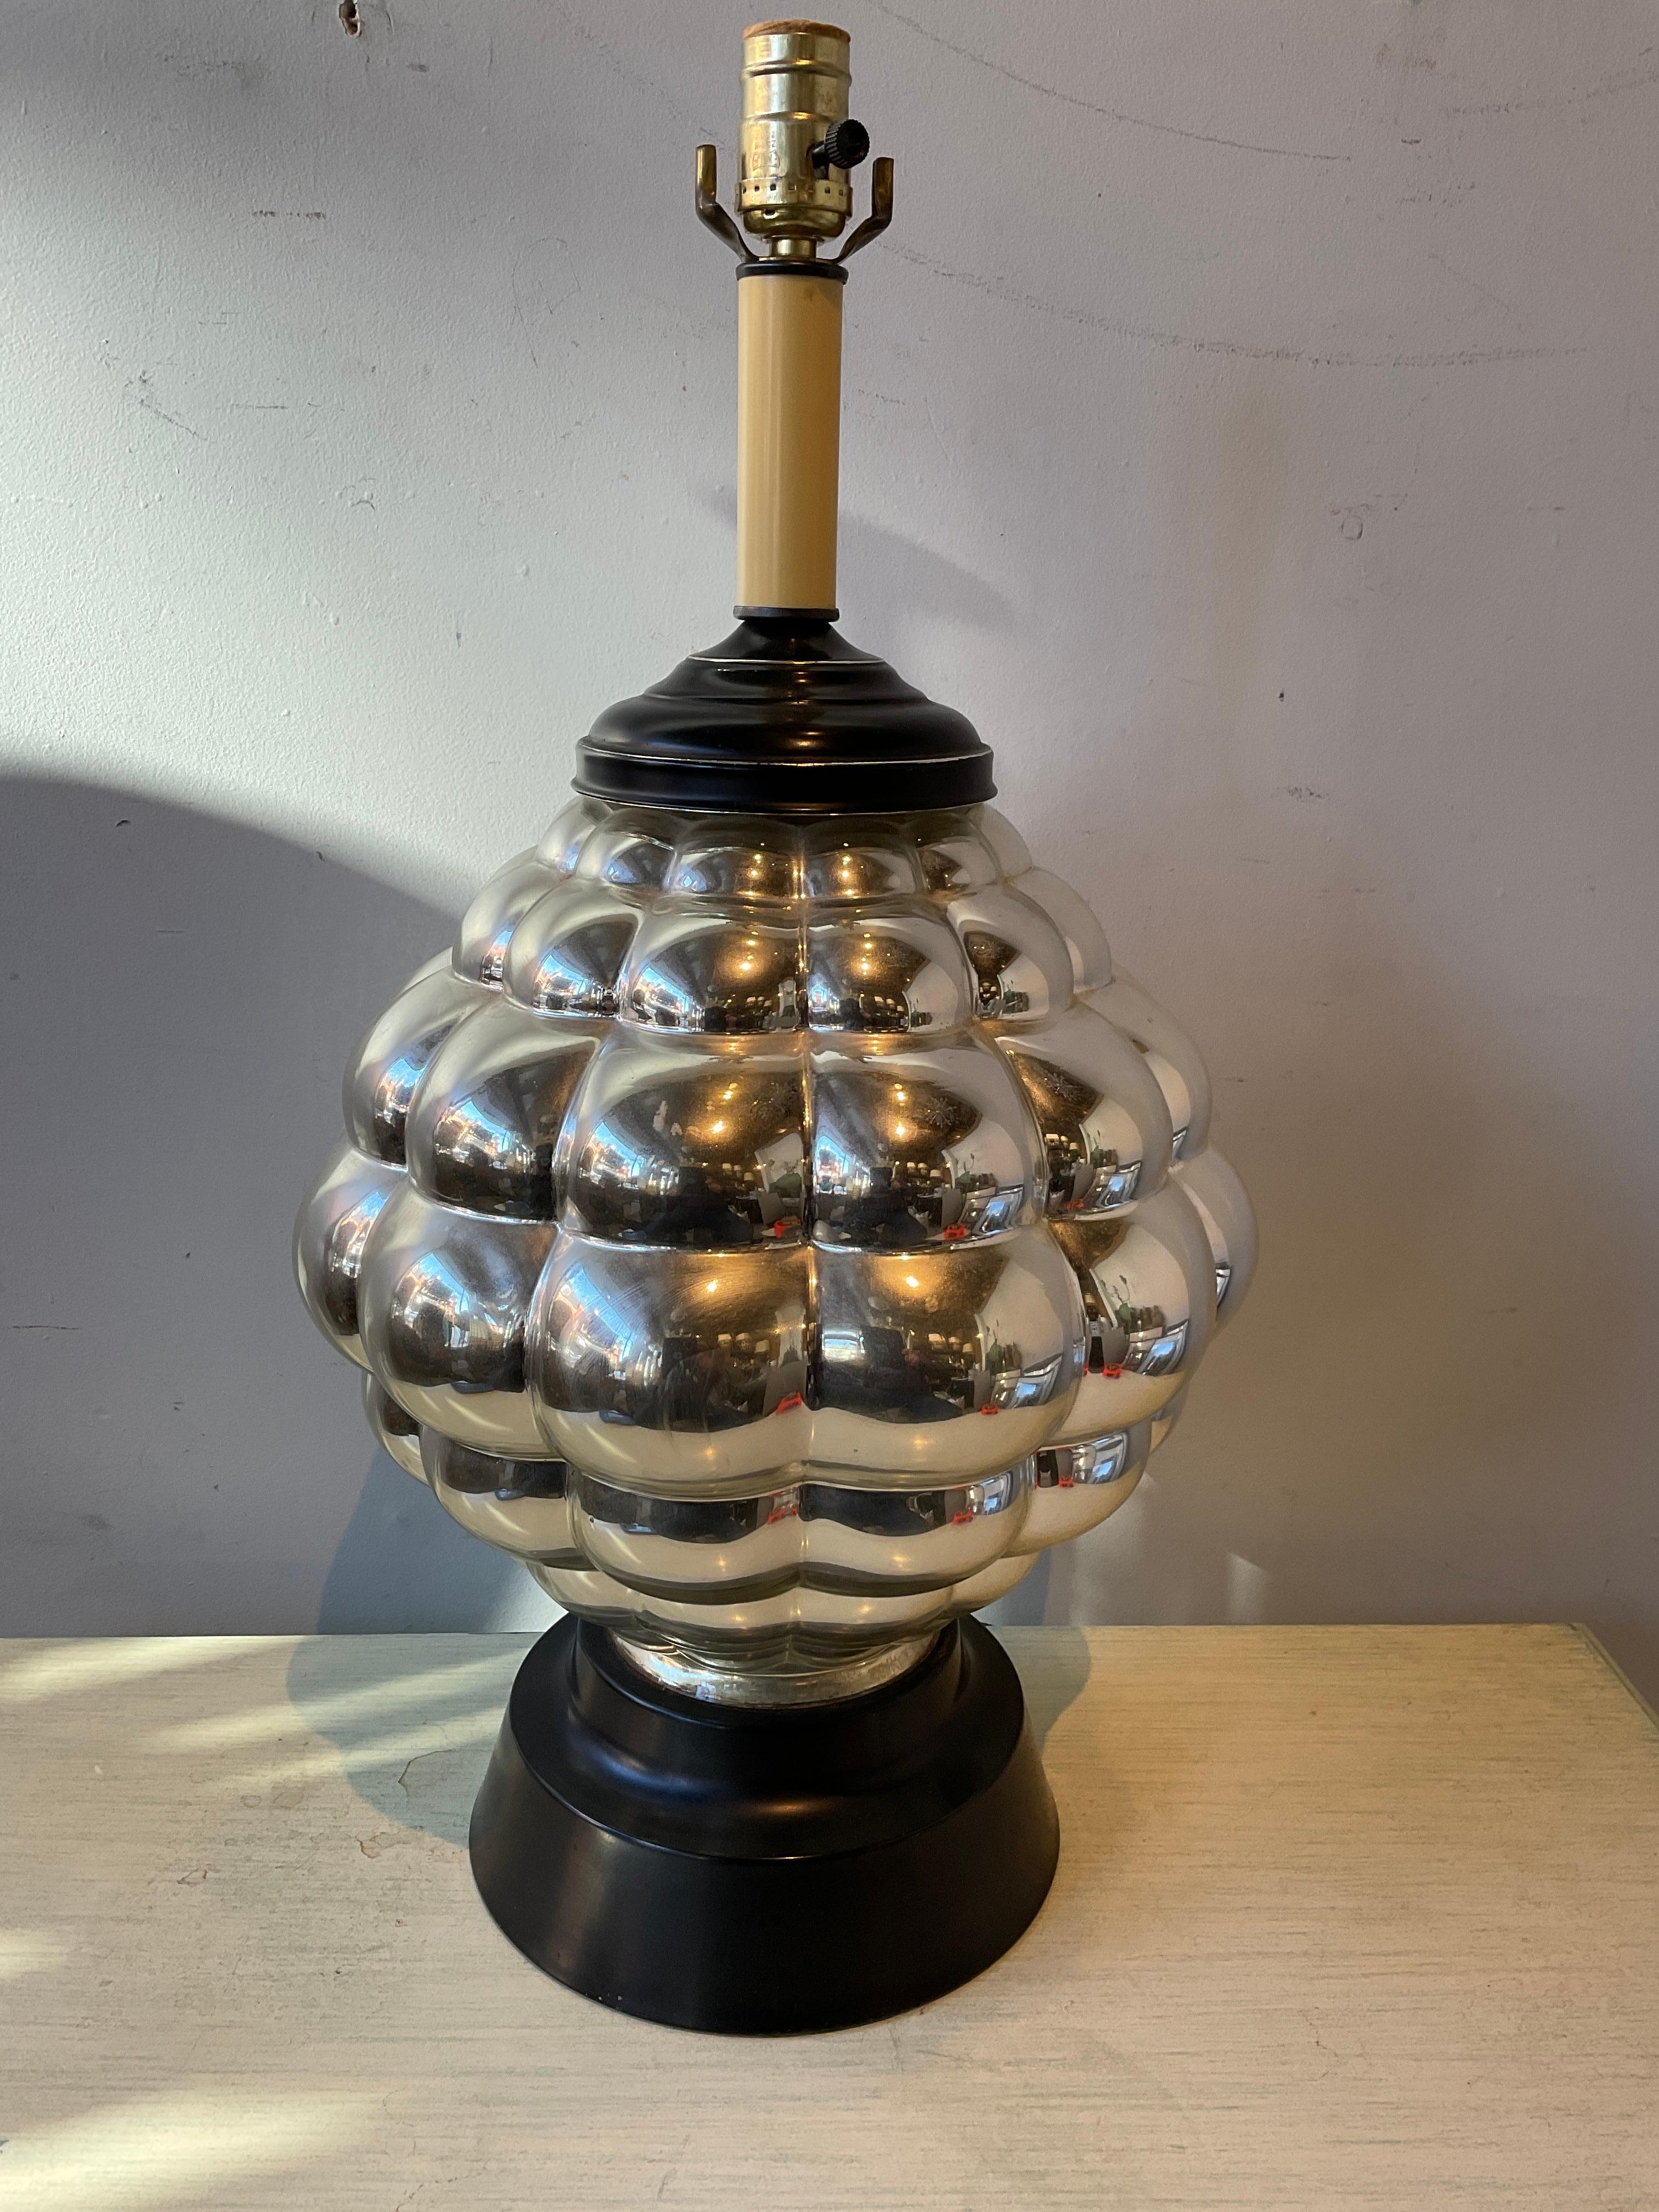 Large 1950s Mercury glass lamp on metal base.
Lamp needs rewiring,
Height is to top of socket.